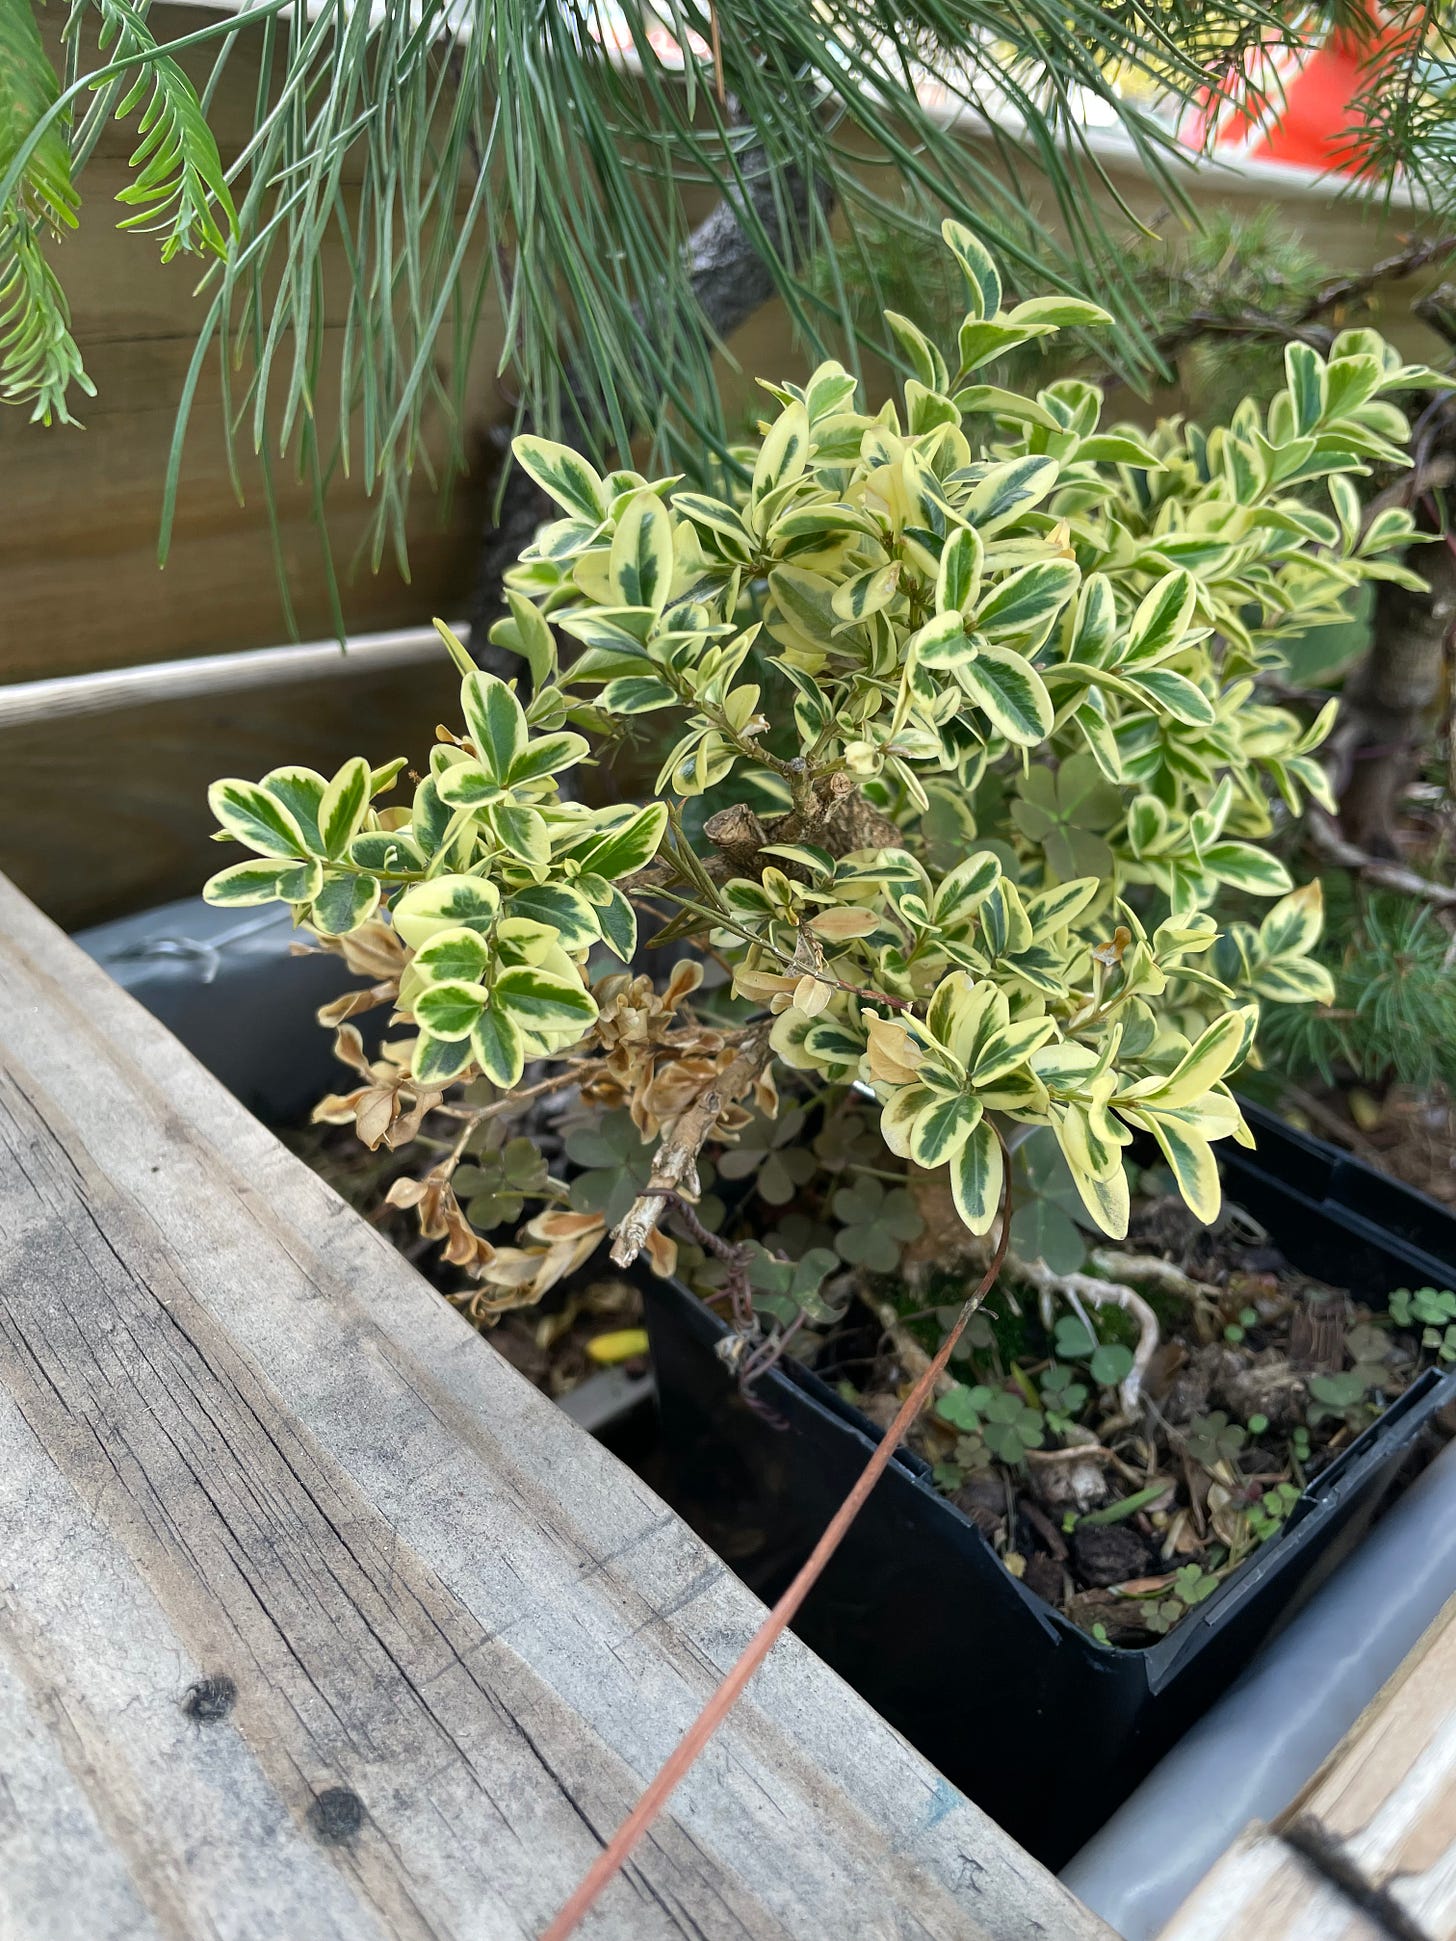 ID: Photo of variegated boxwood with a dead lower branch.